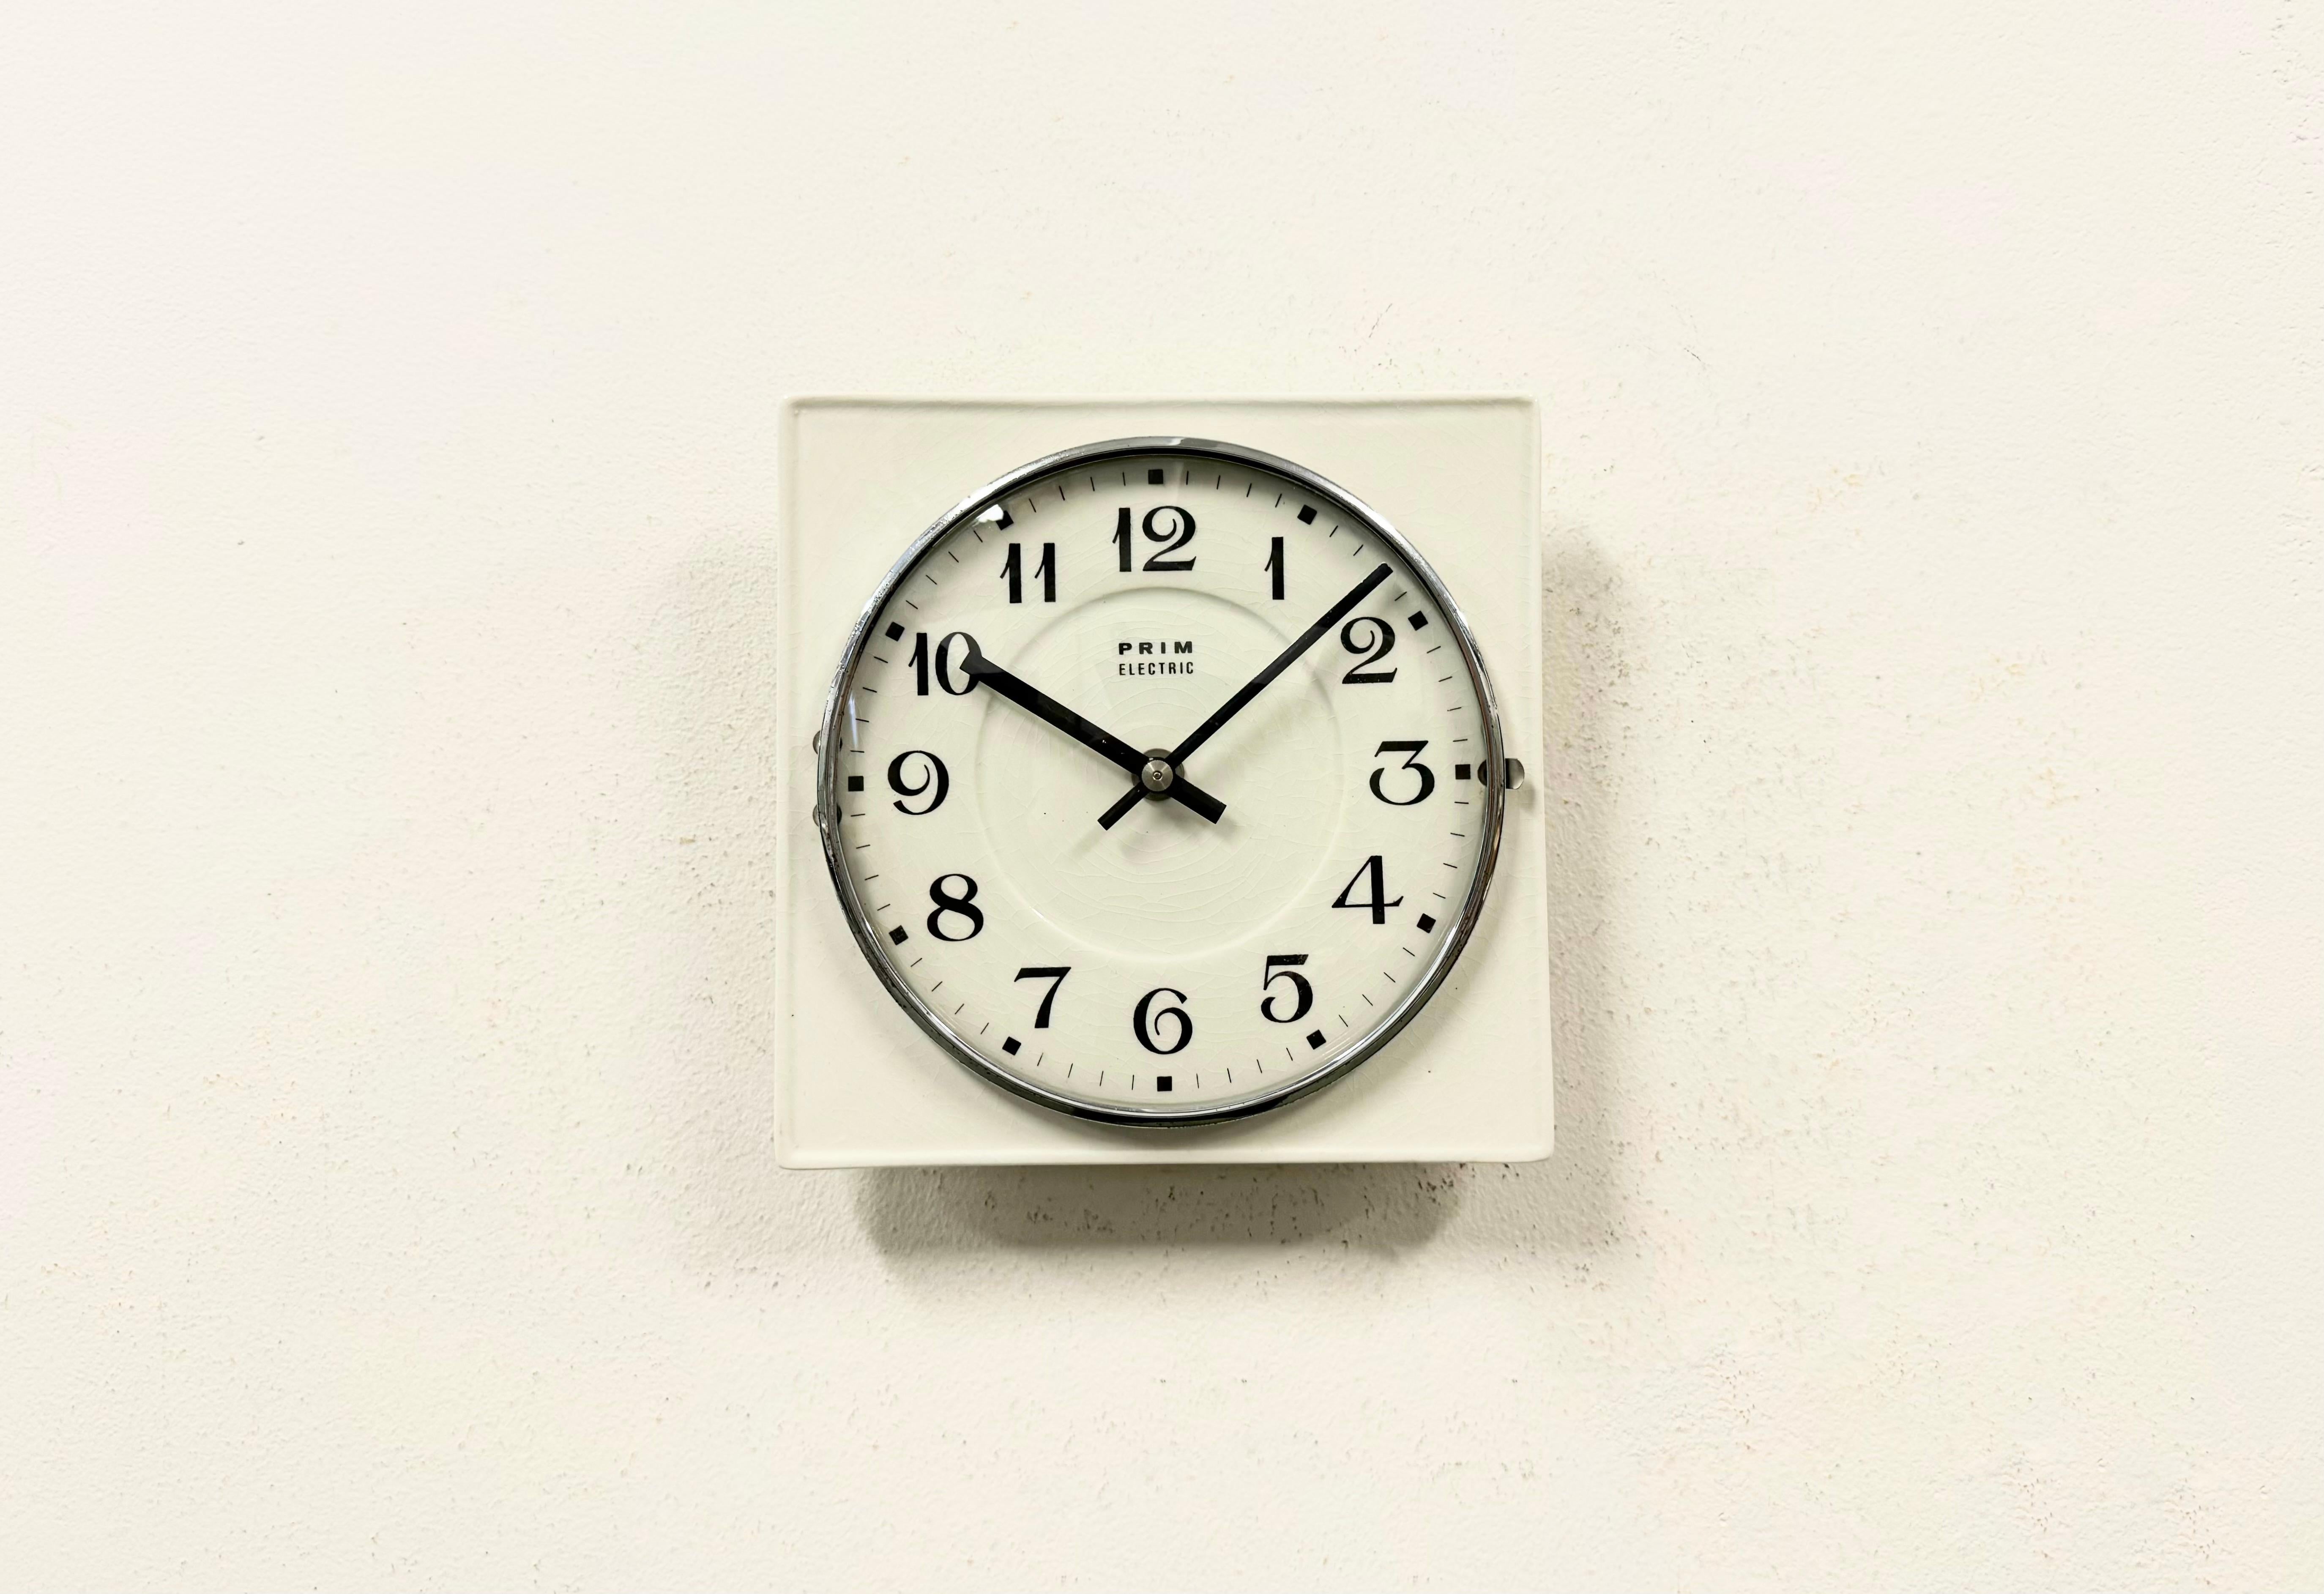 Vintage square wall clock was made by Prim in former Czechoslovakia during the 1970s .. It features a white porcelain body  and a convex clear glass cover with brass ring. The clockwork works perfectly and requires one AA battery.
The clock